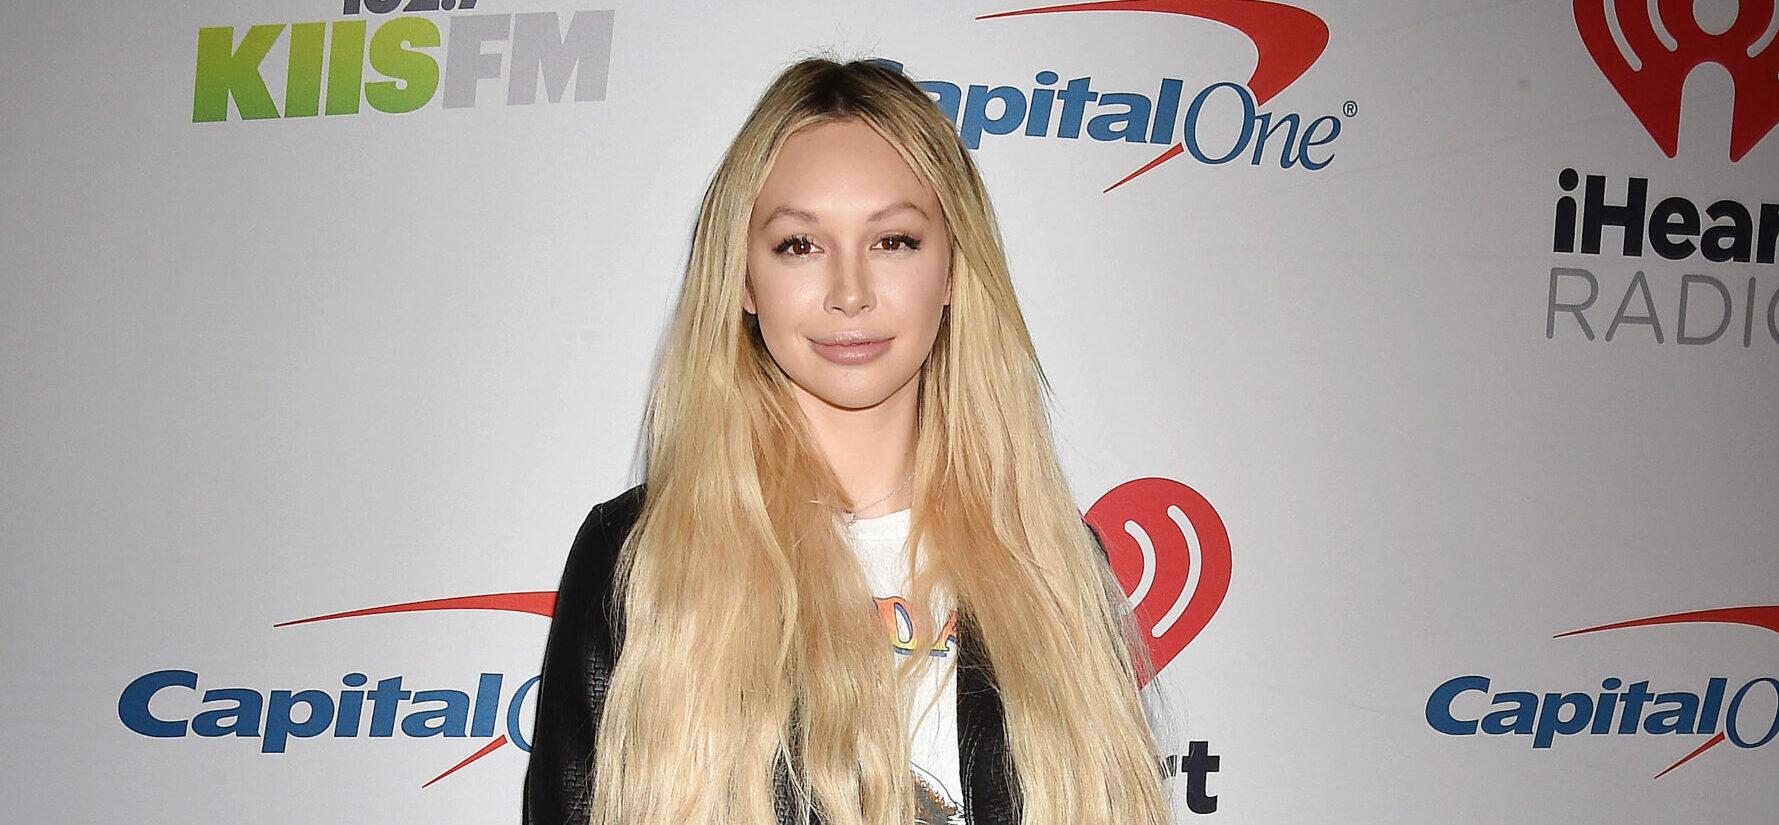 Corinne Olympios KIIS FM's Jingle Ball 2018 Presented By Capital One - Arrivals